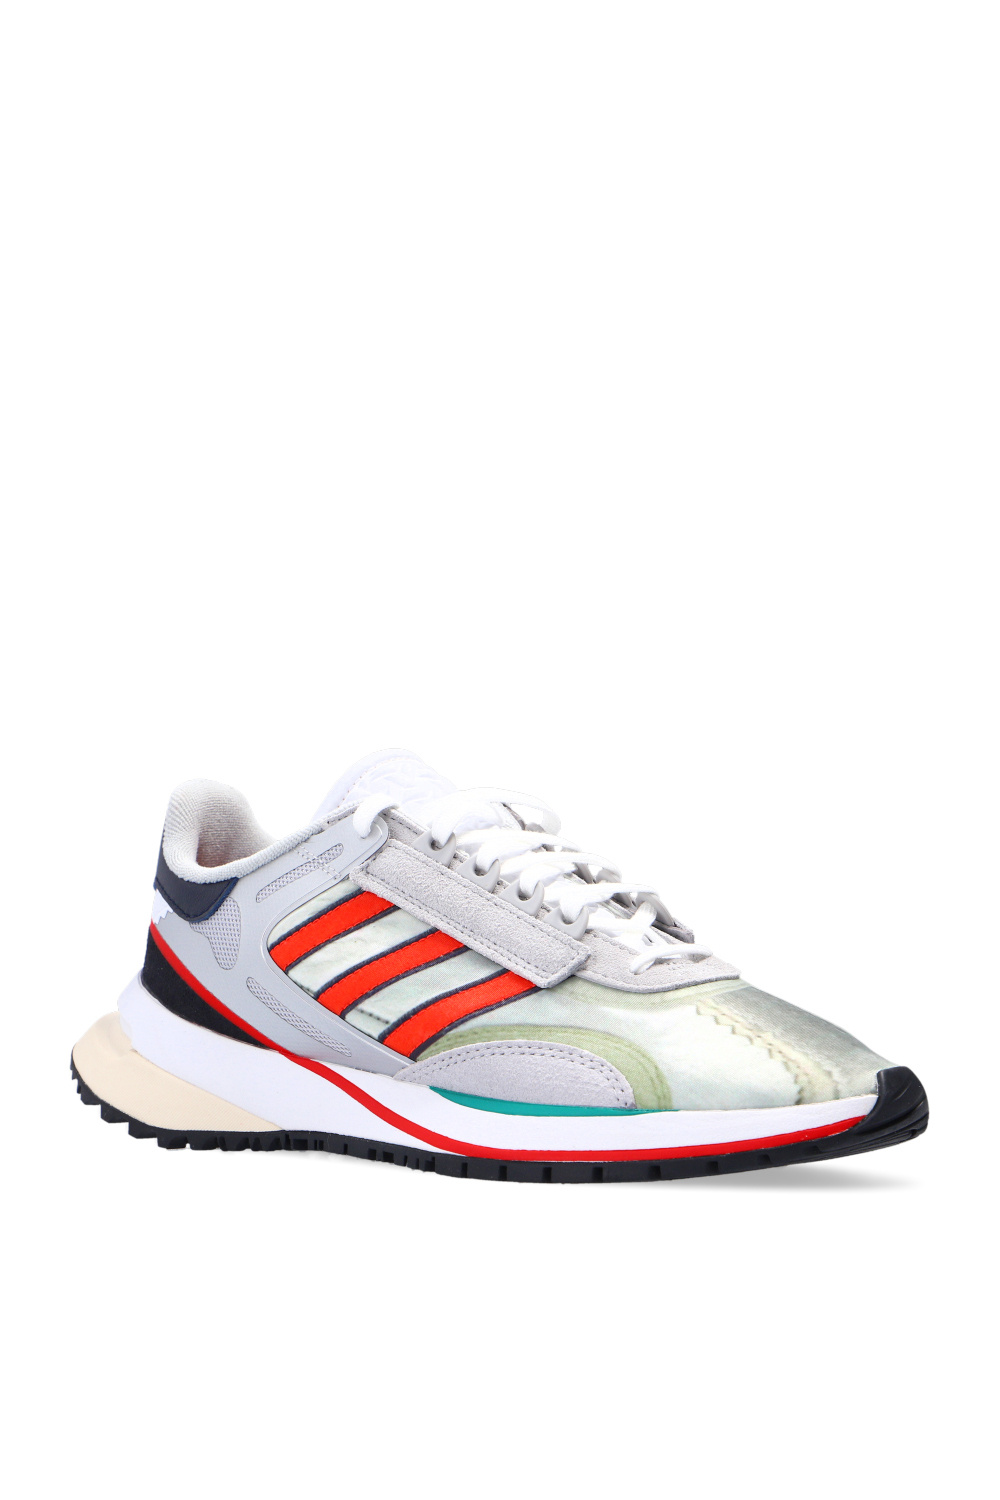 adidas Originals - by4007 Valerance\' for StclaircomoShops chart size - women ADIDAS shoes Mali sneakers